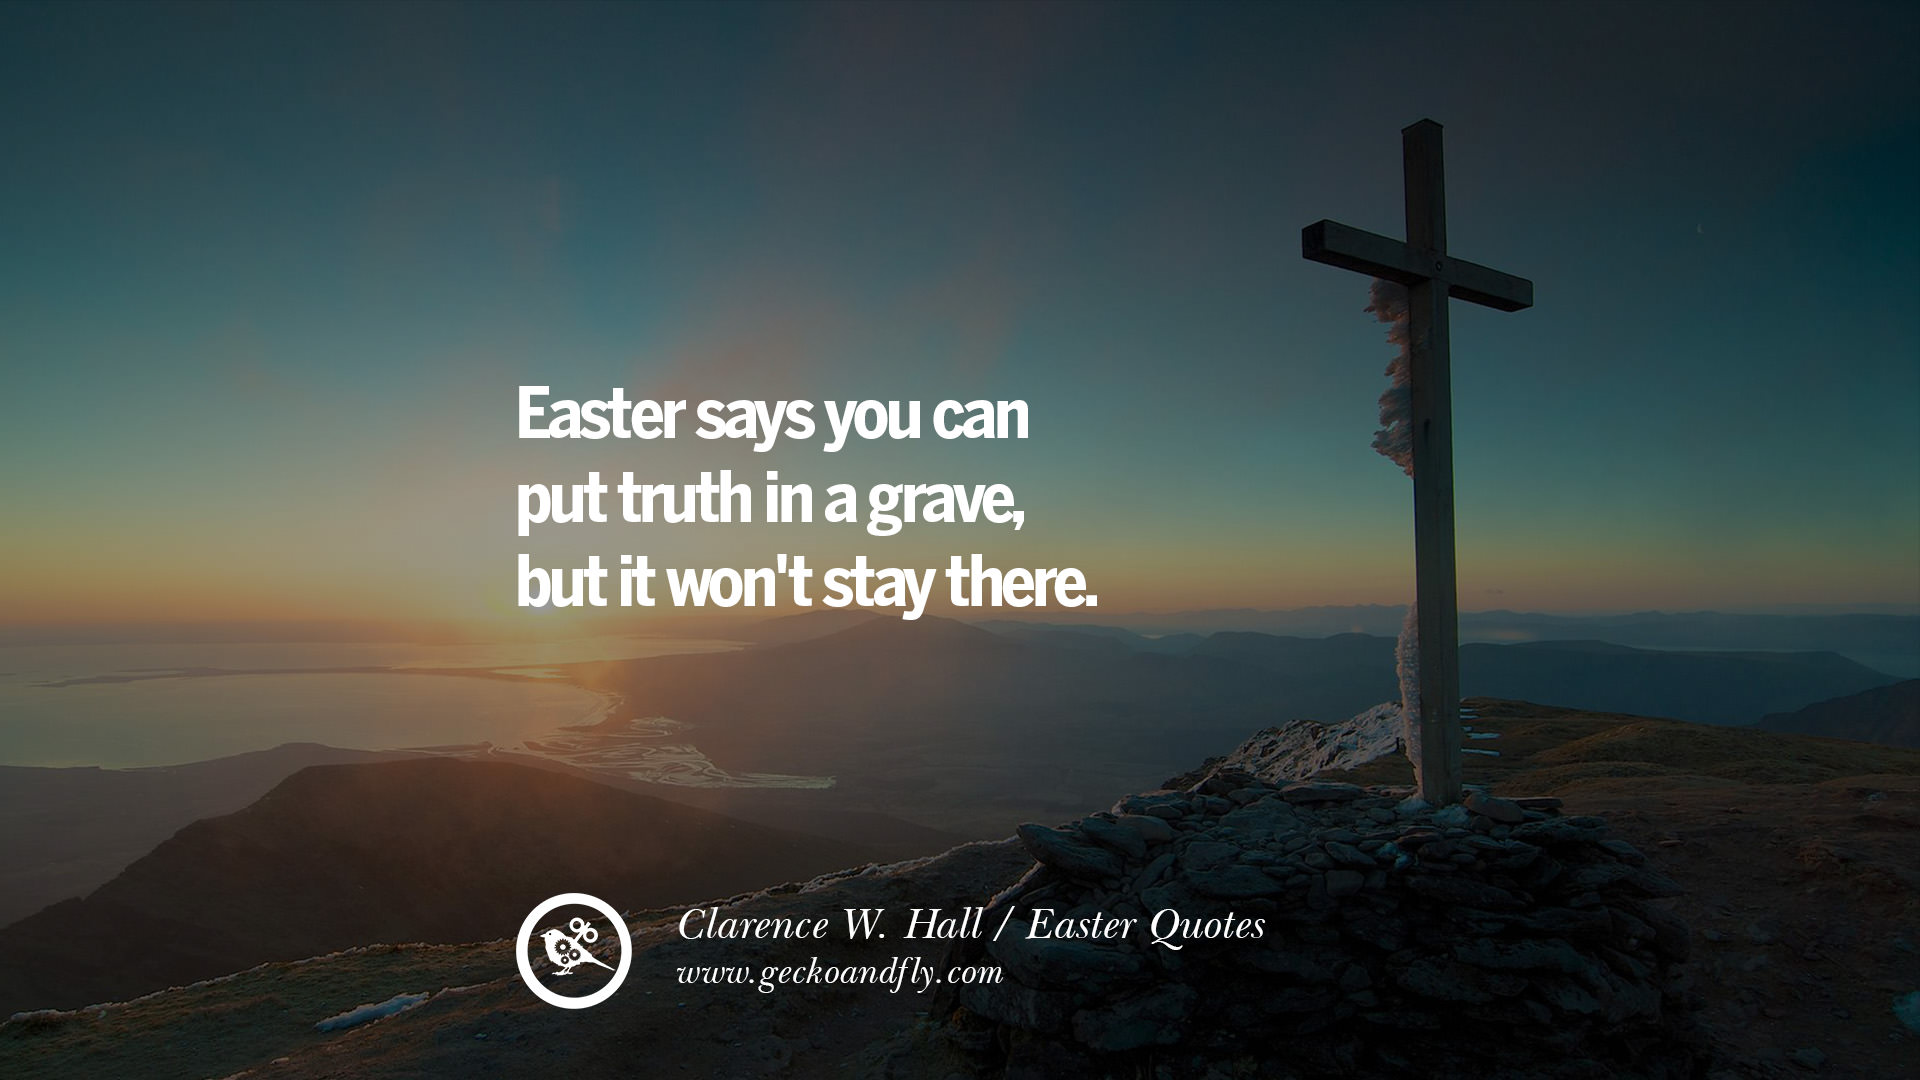 30 Happy Easter Quotes - A New Beginning And Second Chance1920 x 1080